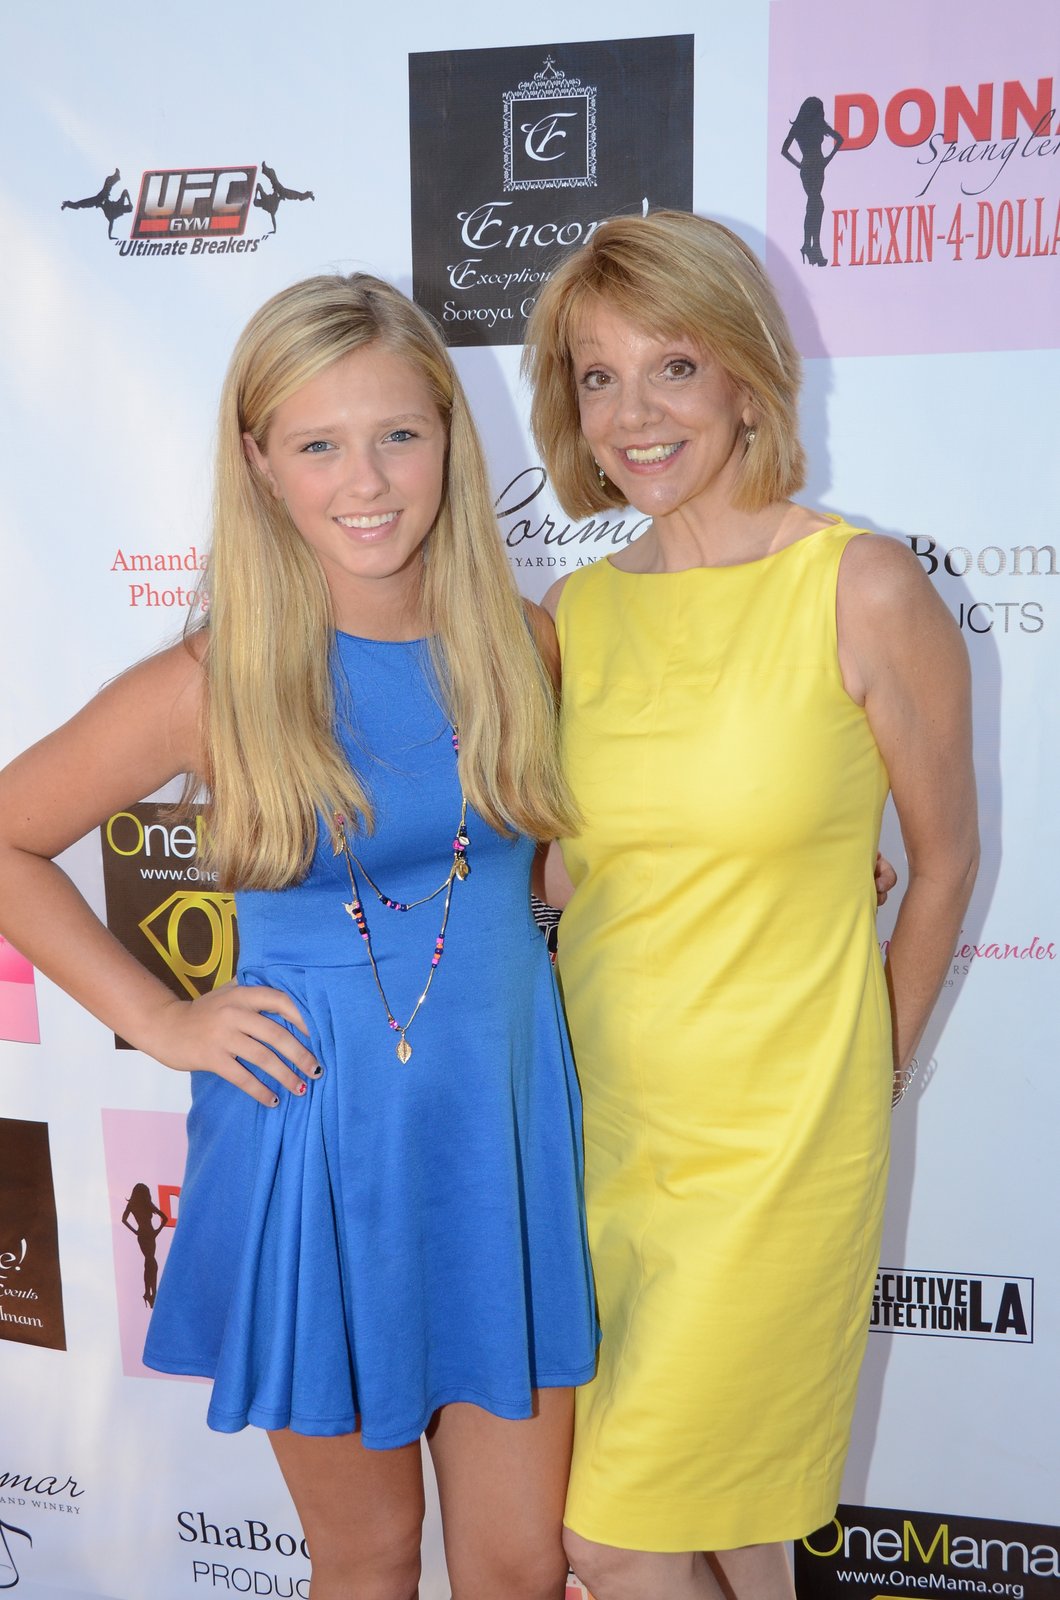 Emily with Teresa Ganzel (Toy Story 3, Cars, Monster, Inc.)